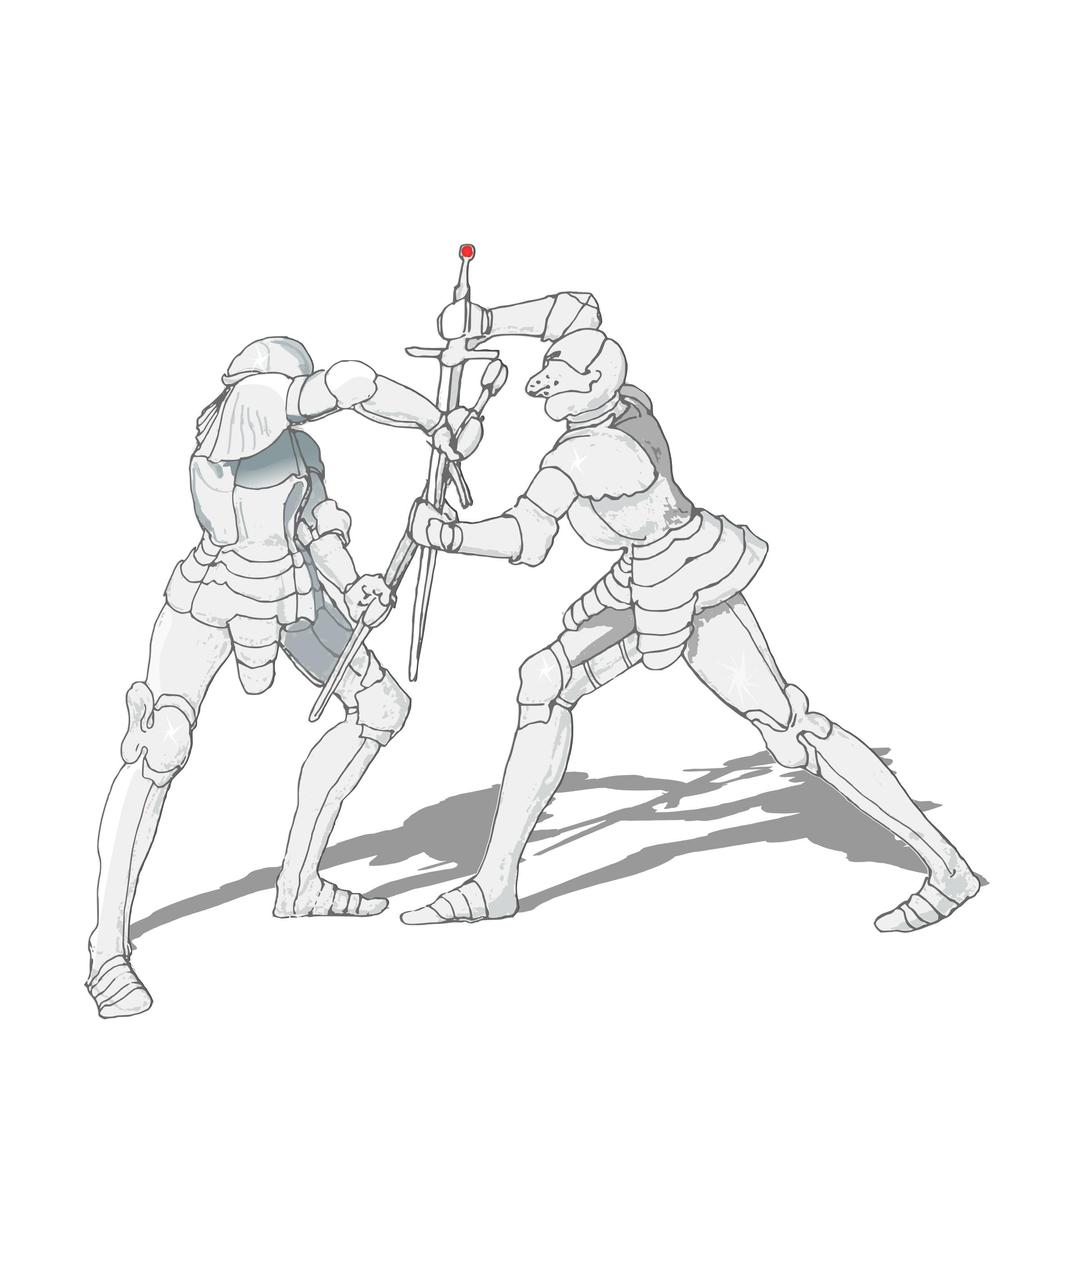  the sword fight png transparent